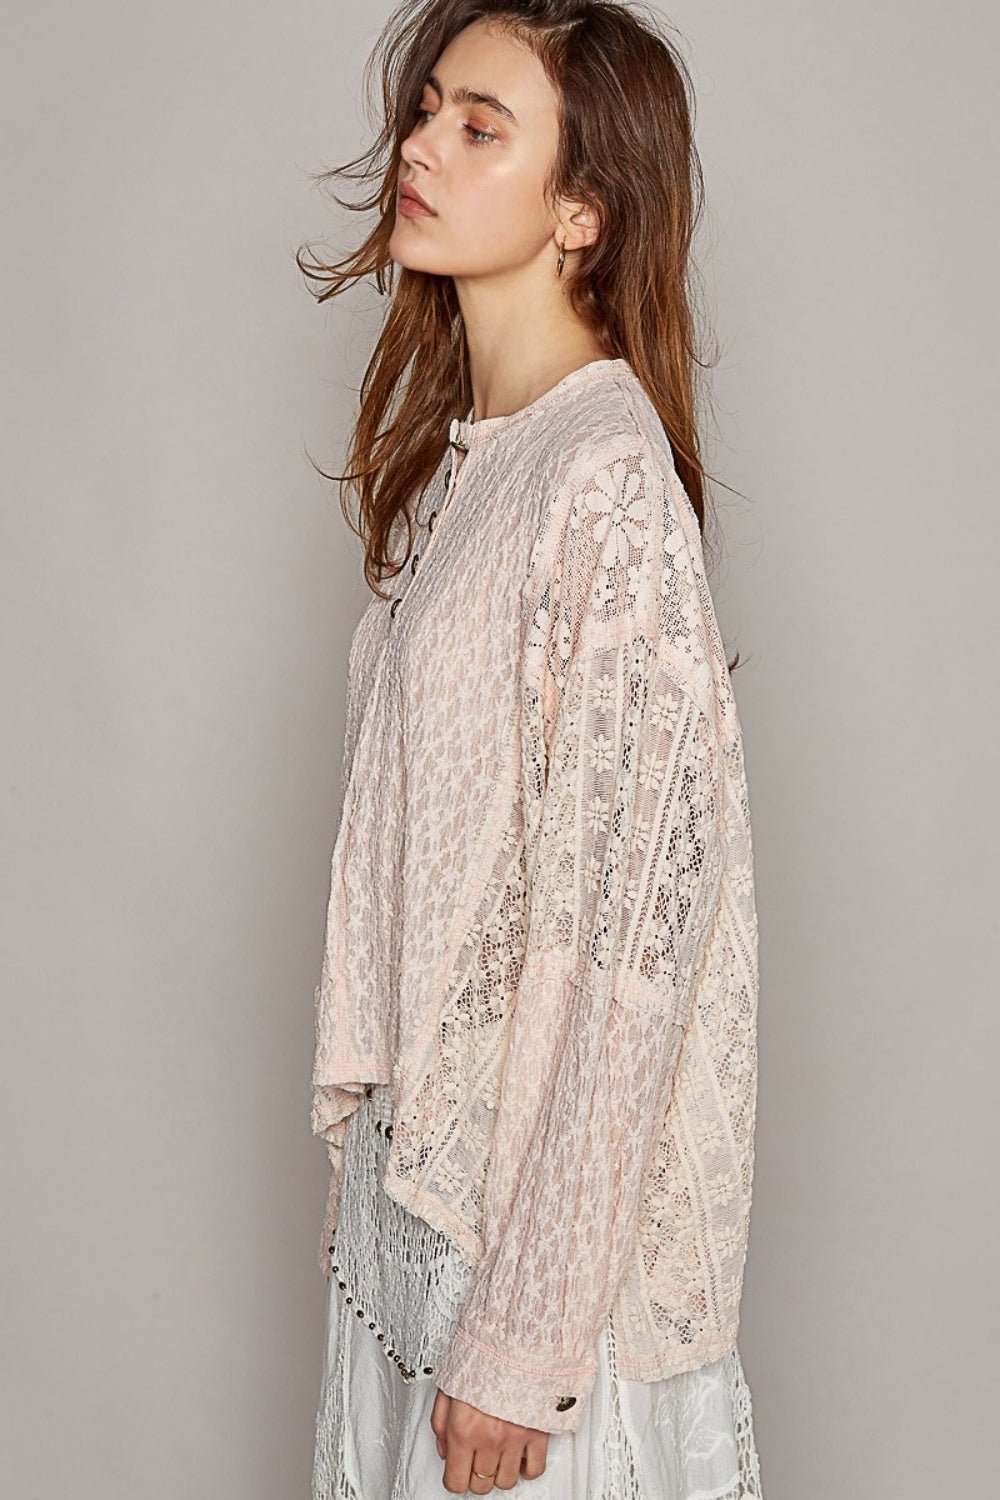 High-Low Long Sleeve Raw Edge Lace Tunic Top in BlushTopPOL